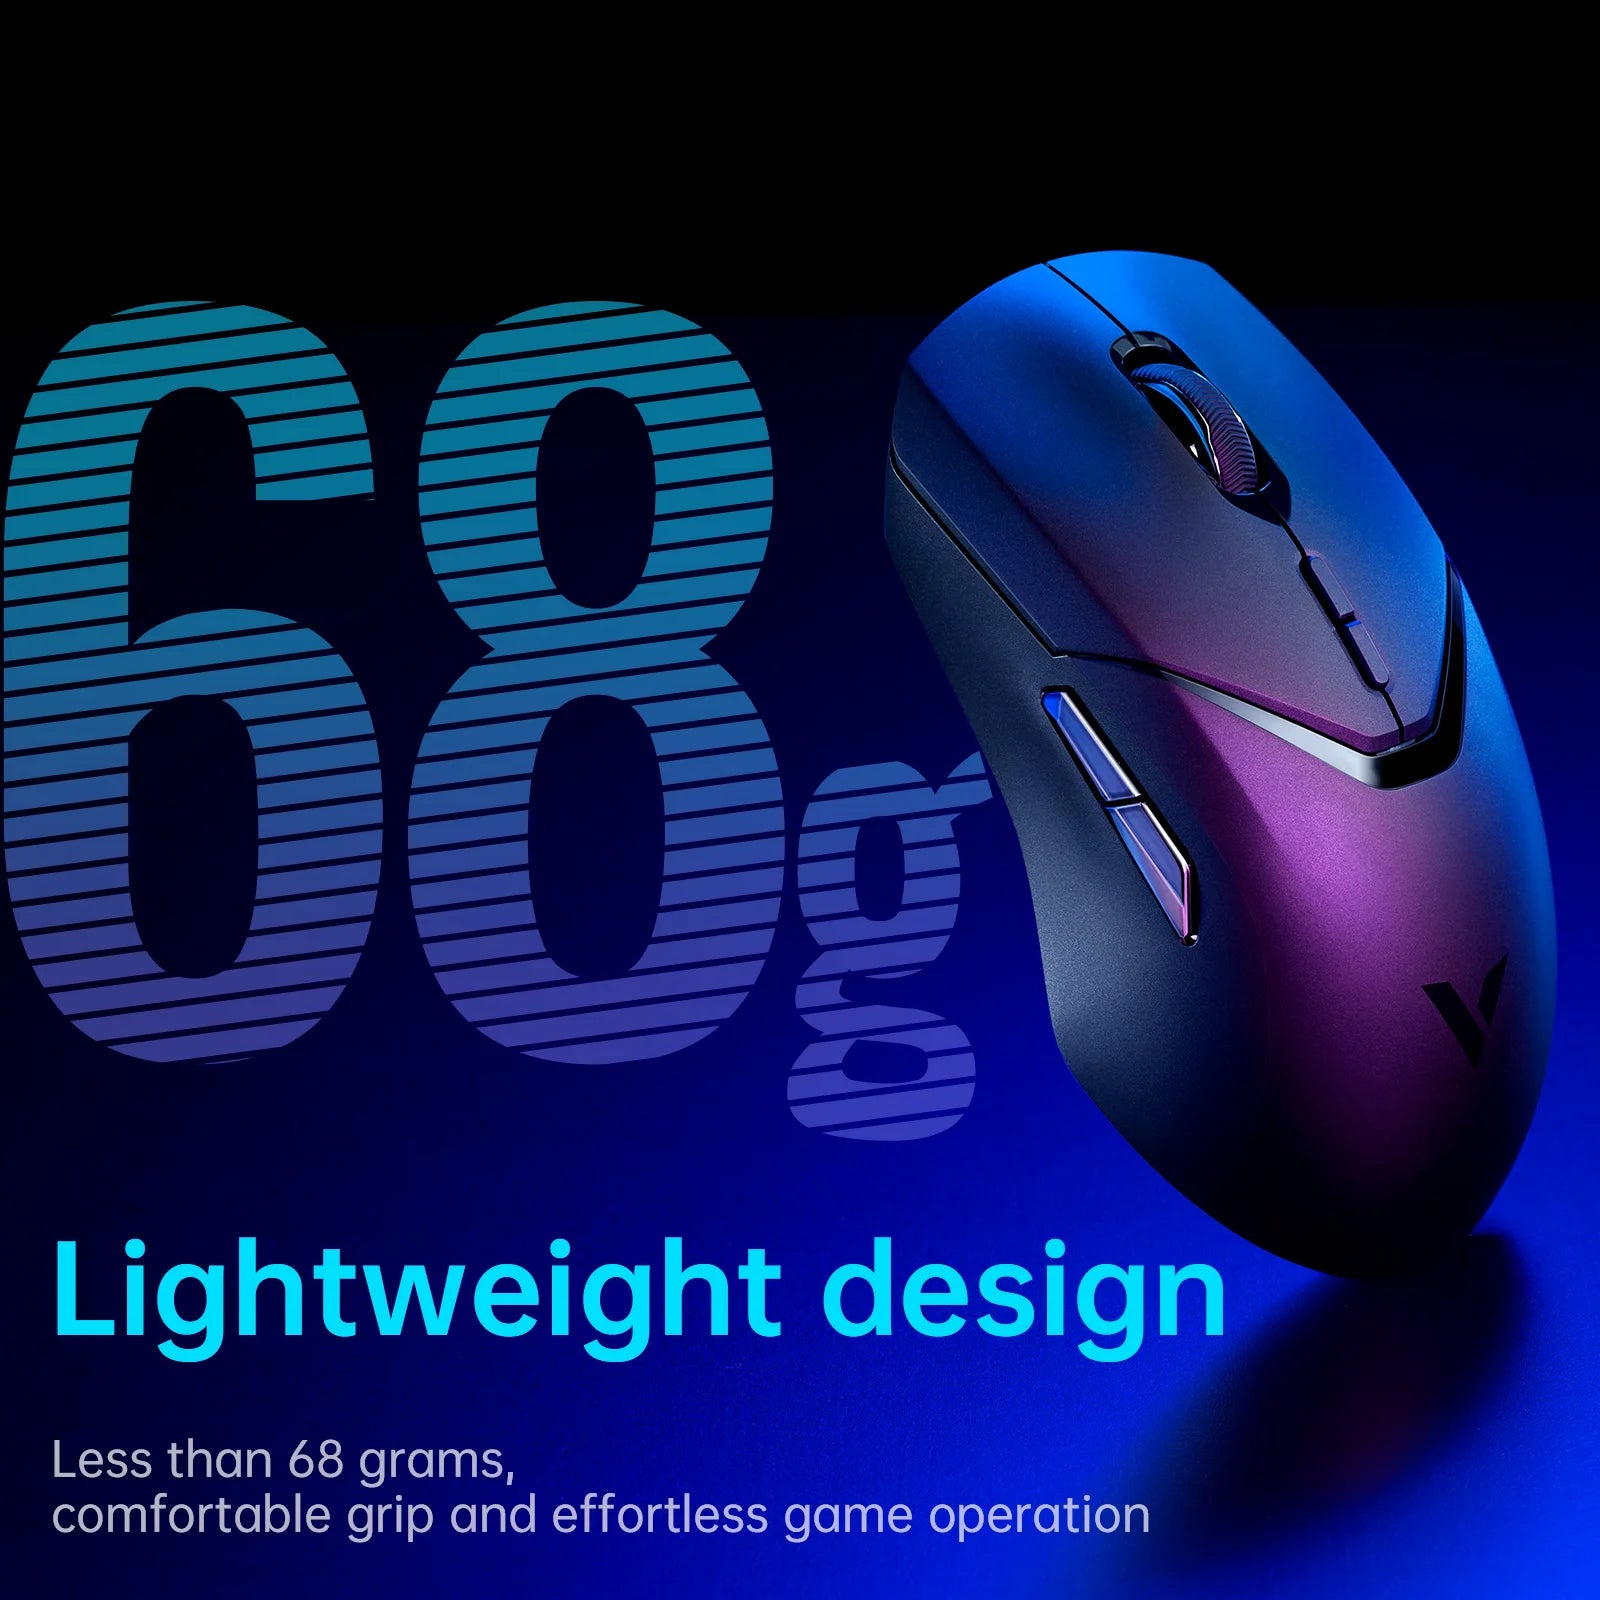 Rapoo VT9PRO Wireless Gaming Mouse Esports Grade 68g Ultra-Light 26000DPI 8 Buttons Optical PAW3398 Computer Mouse For Laptop PC